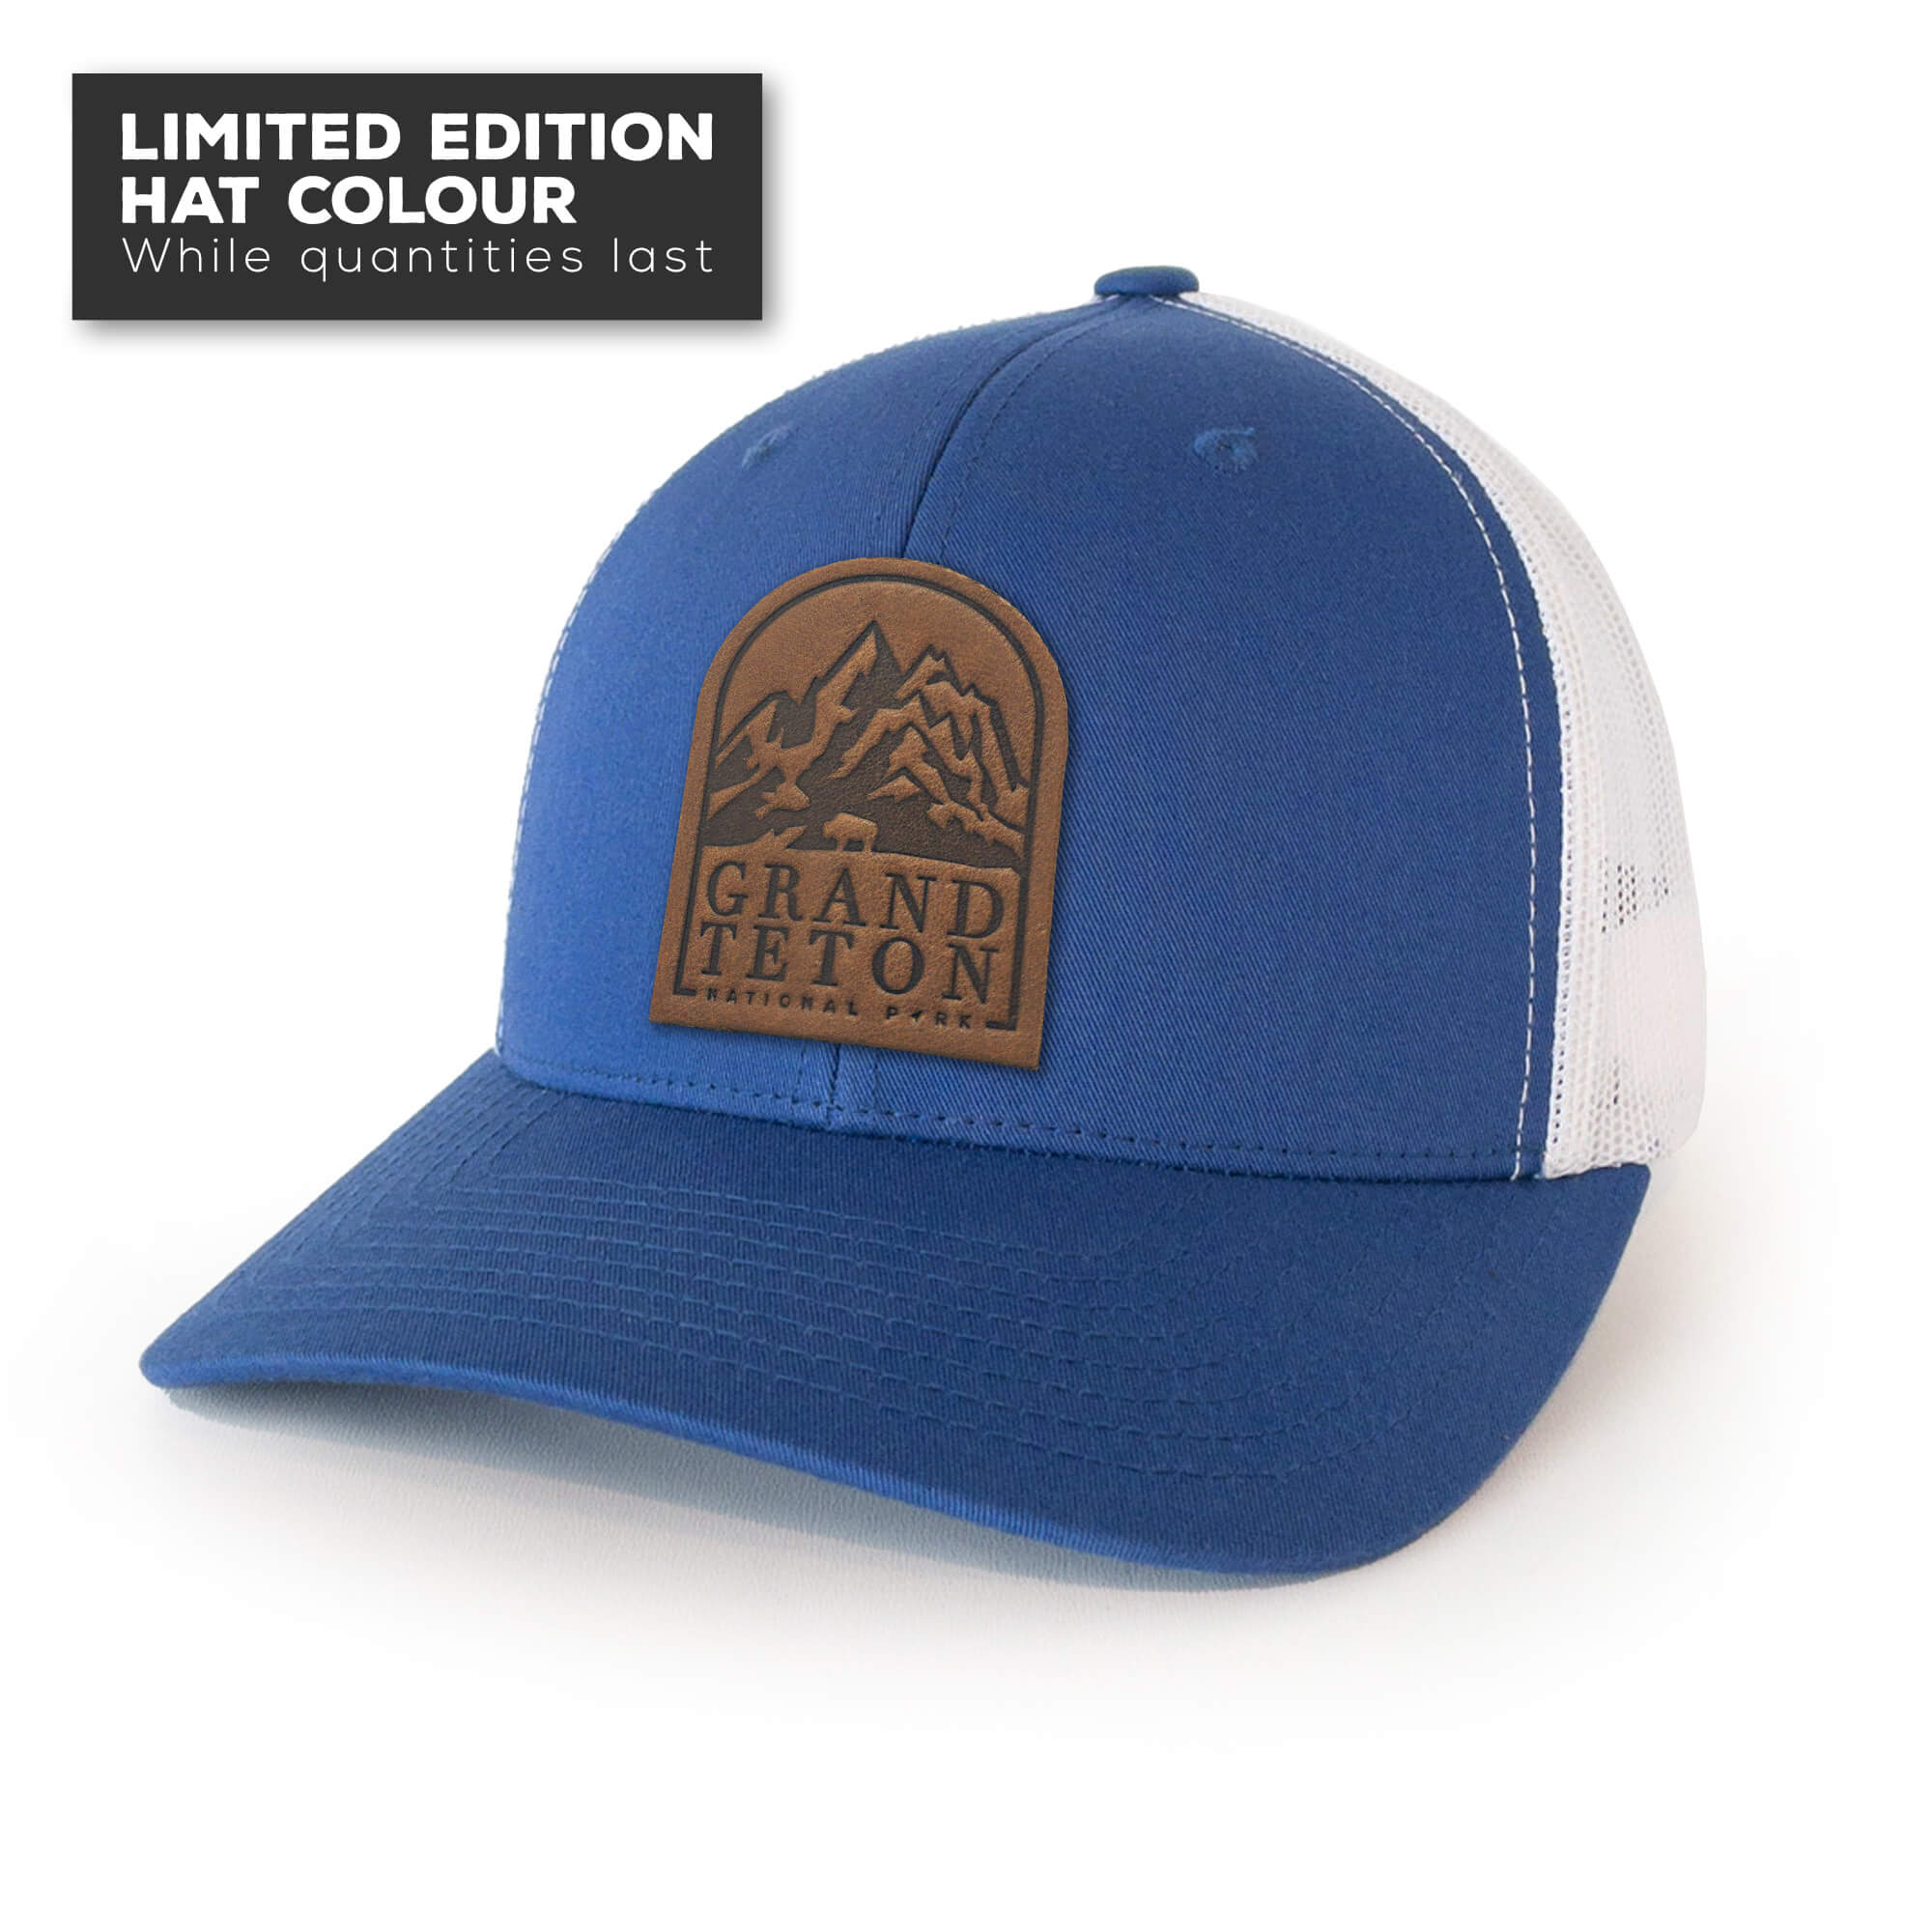 Royal Blue trucker hat with full-grain leather patch of Grand Teton